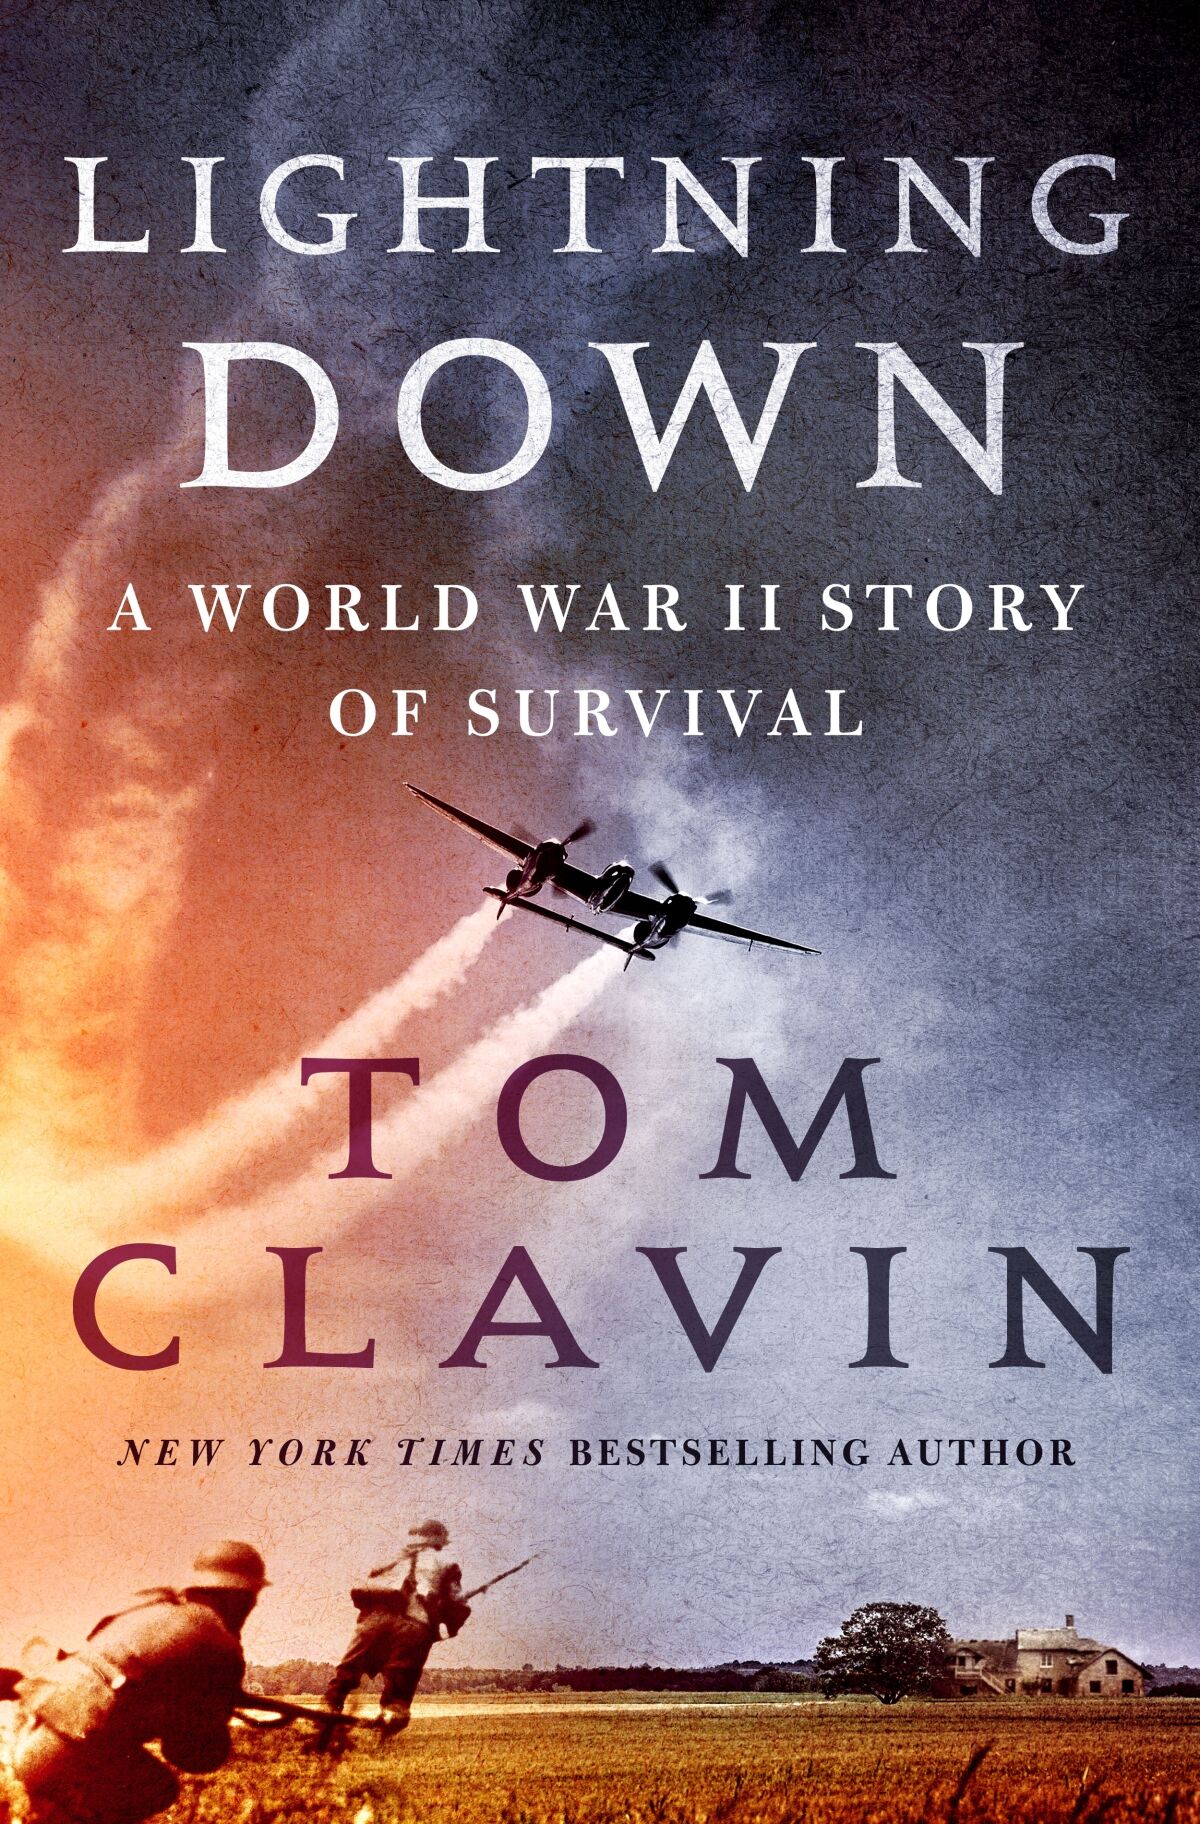 This cover image released by St. Martin’s Press shows "Lightning Down: Lightning Down: A World War II Story of Survival" by Tom Clavin. (St. Martin’s Press via AP)